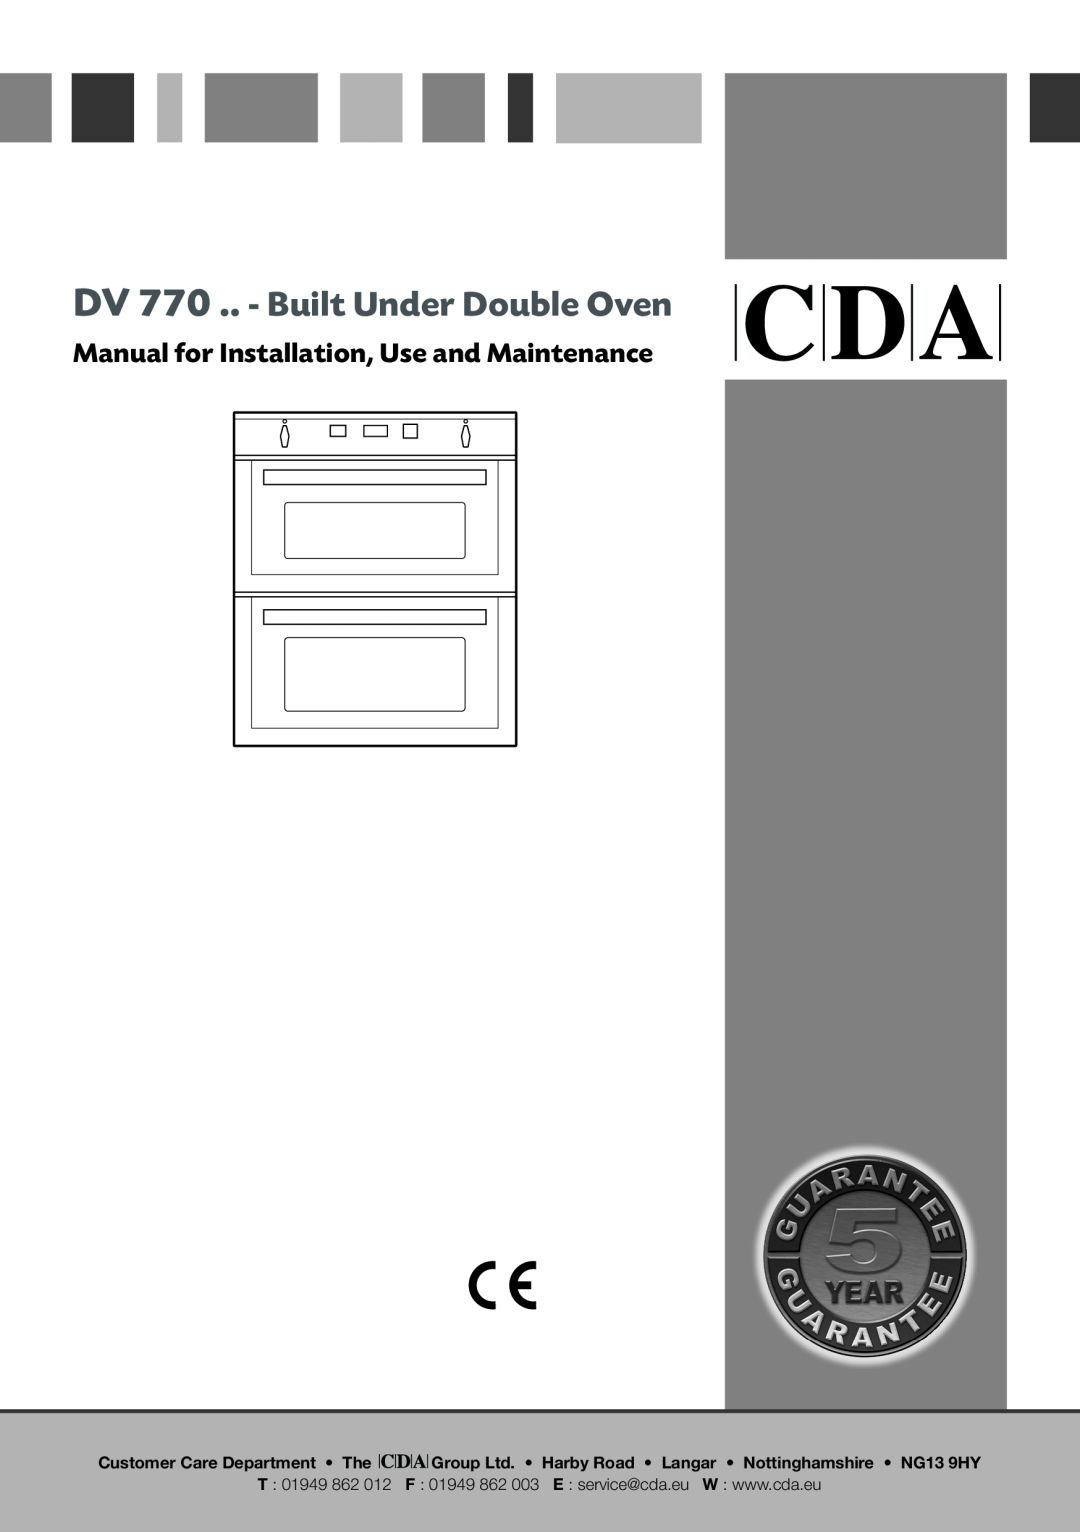 CDA manual DV 770 .. - Built Under Double Oven, Manual for Installation, Use and Maintenance, T 01949 